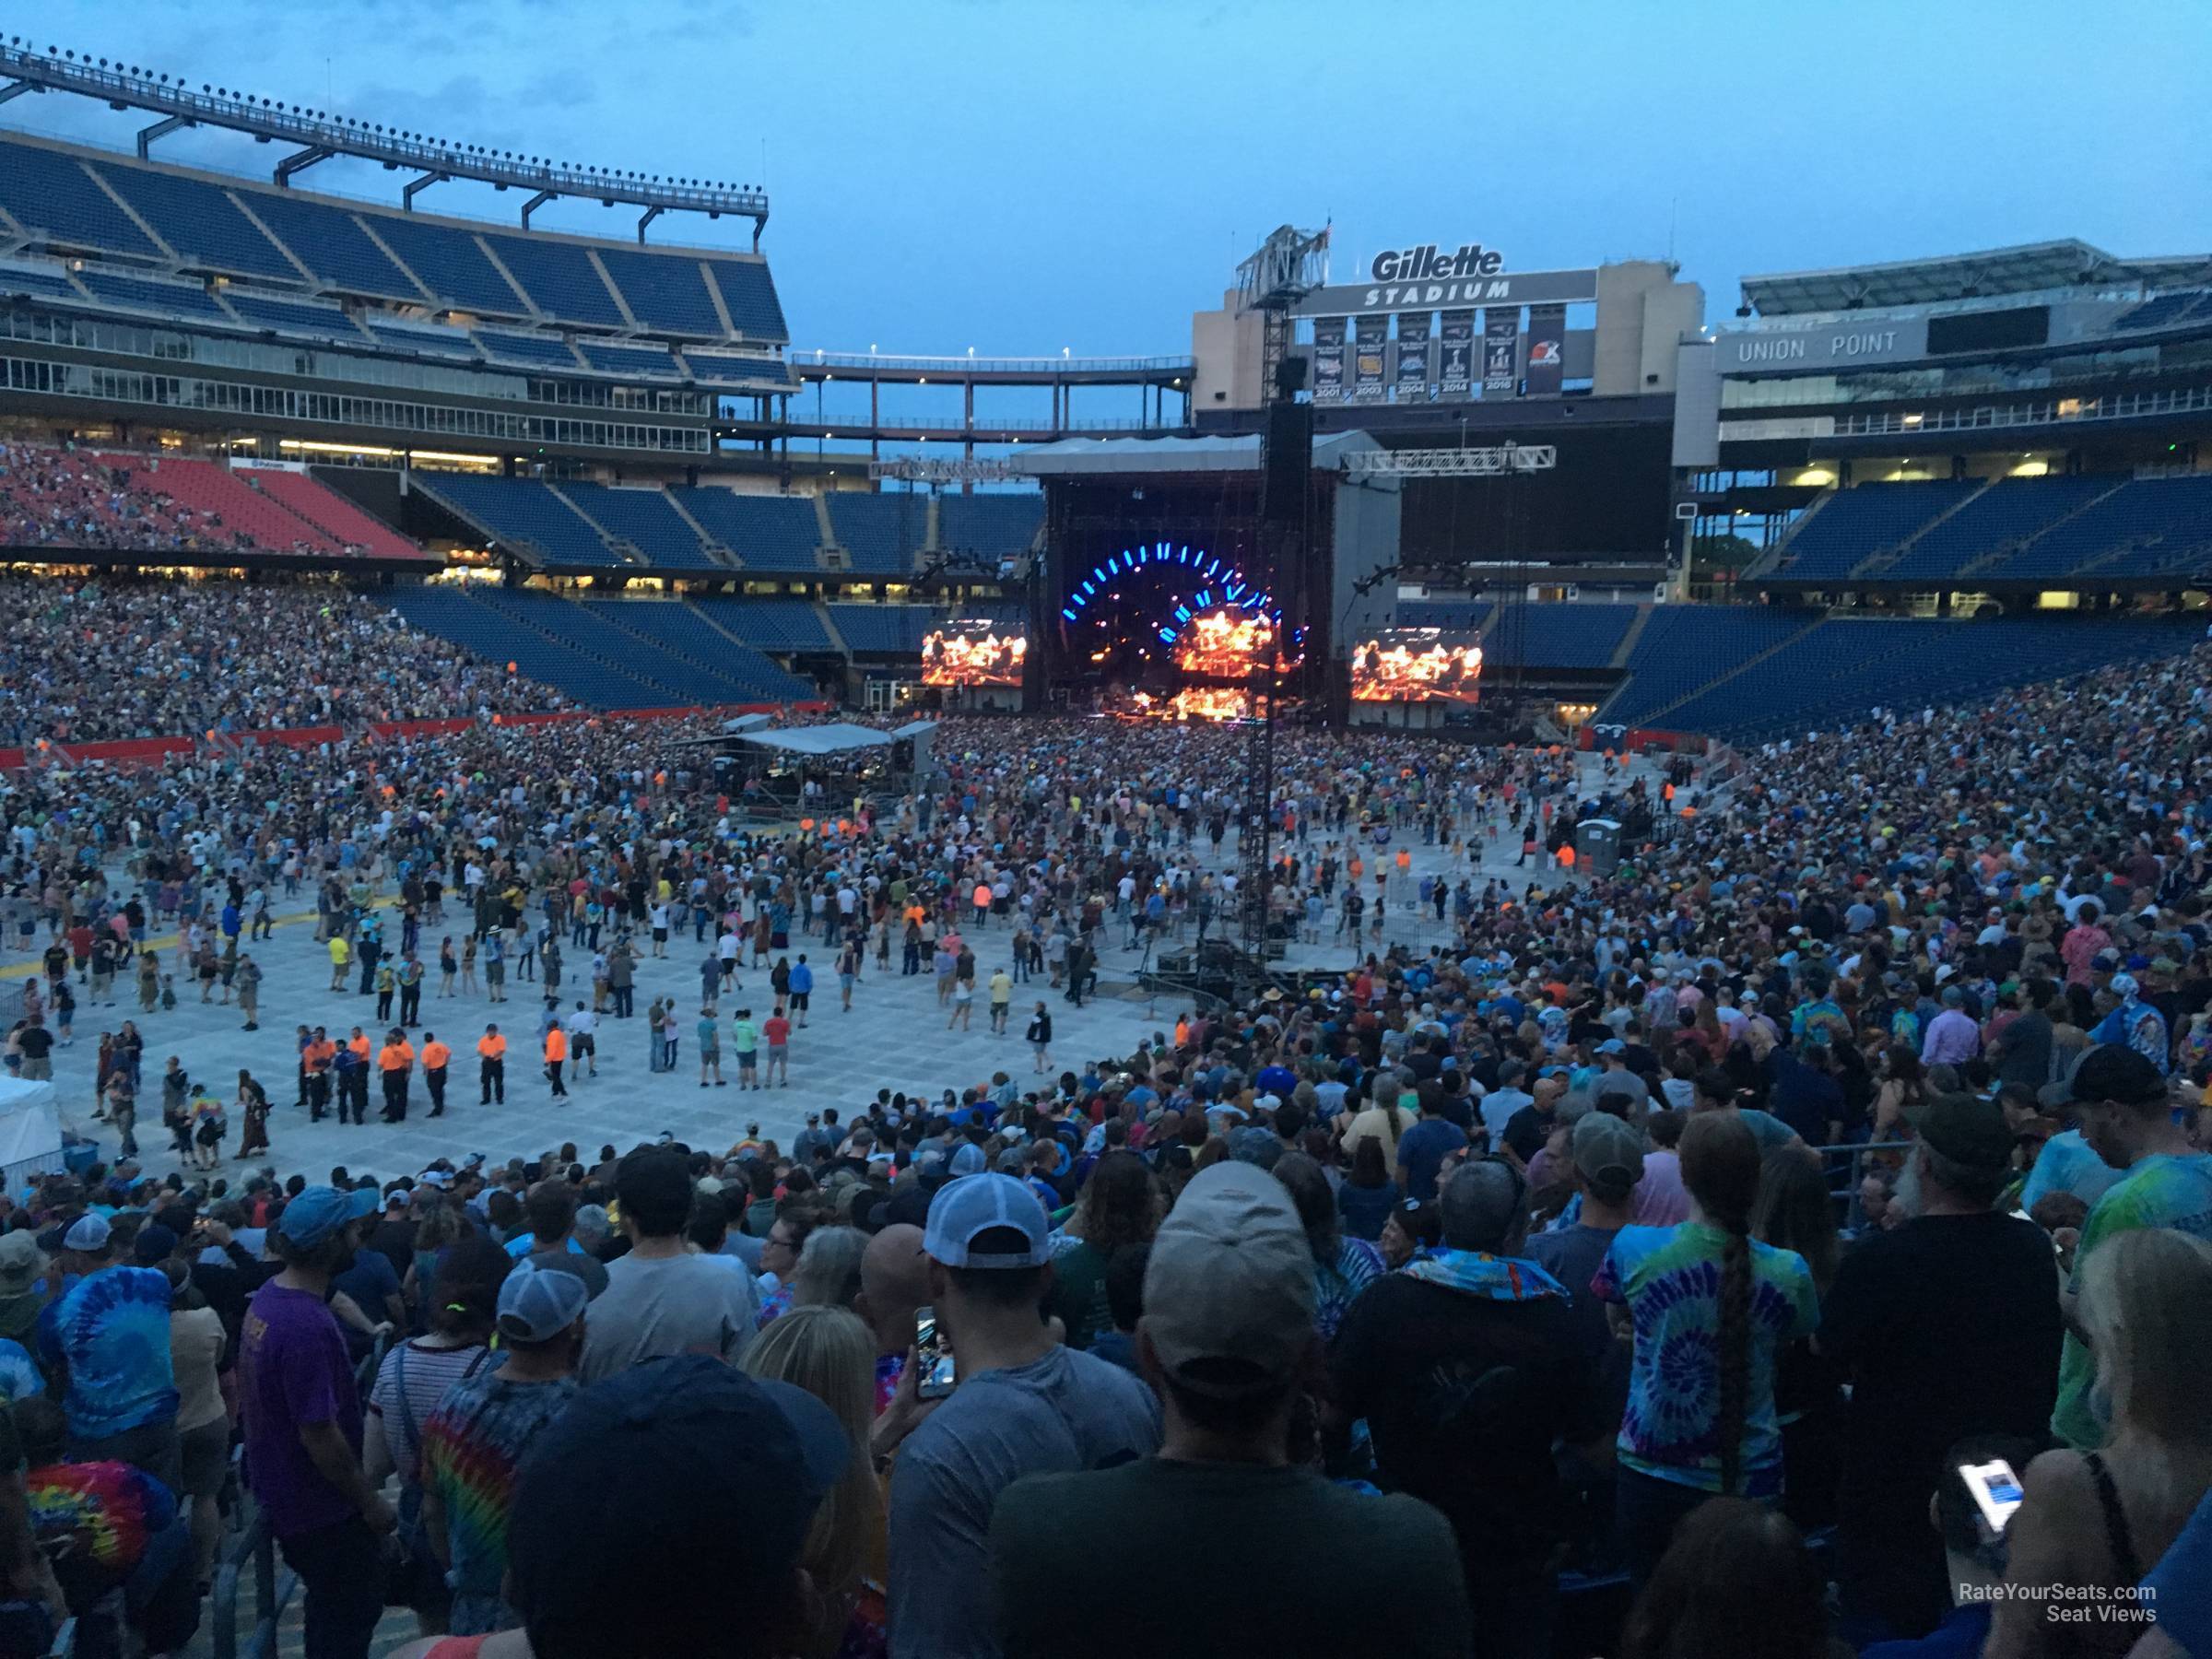 section 138, row 38 seat view  for concert - gillette stadium